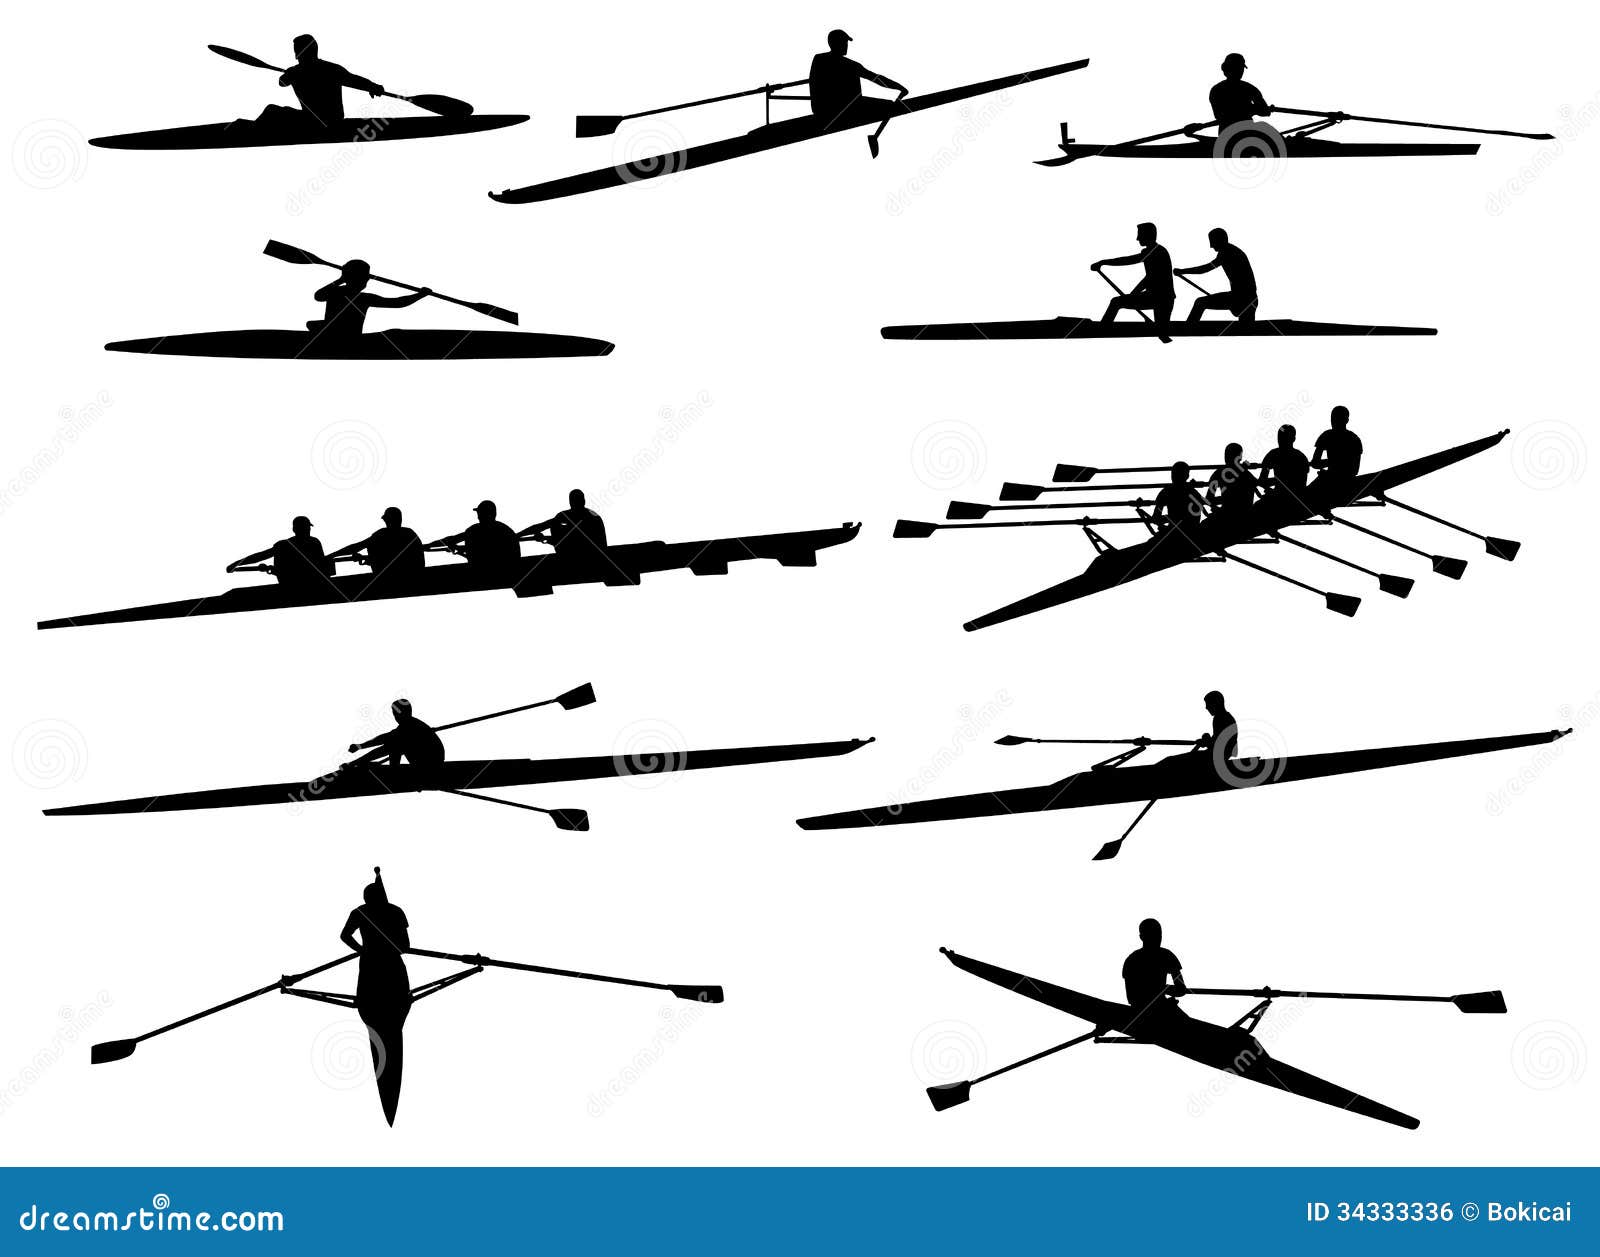 Rowing Silhouettes Royalty Free Stock Image - Image: 34333336